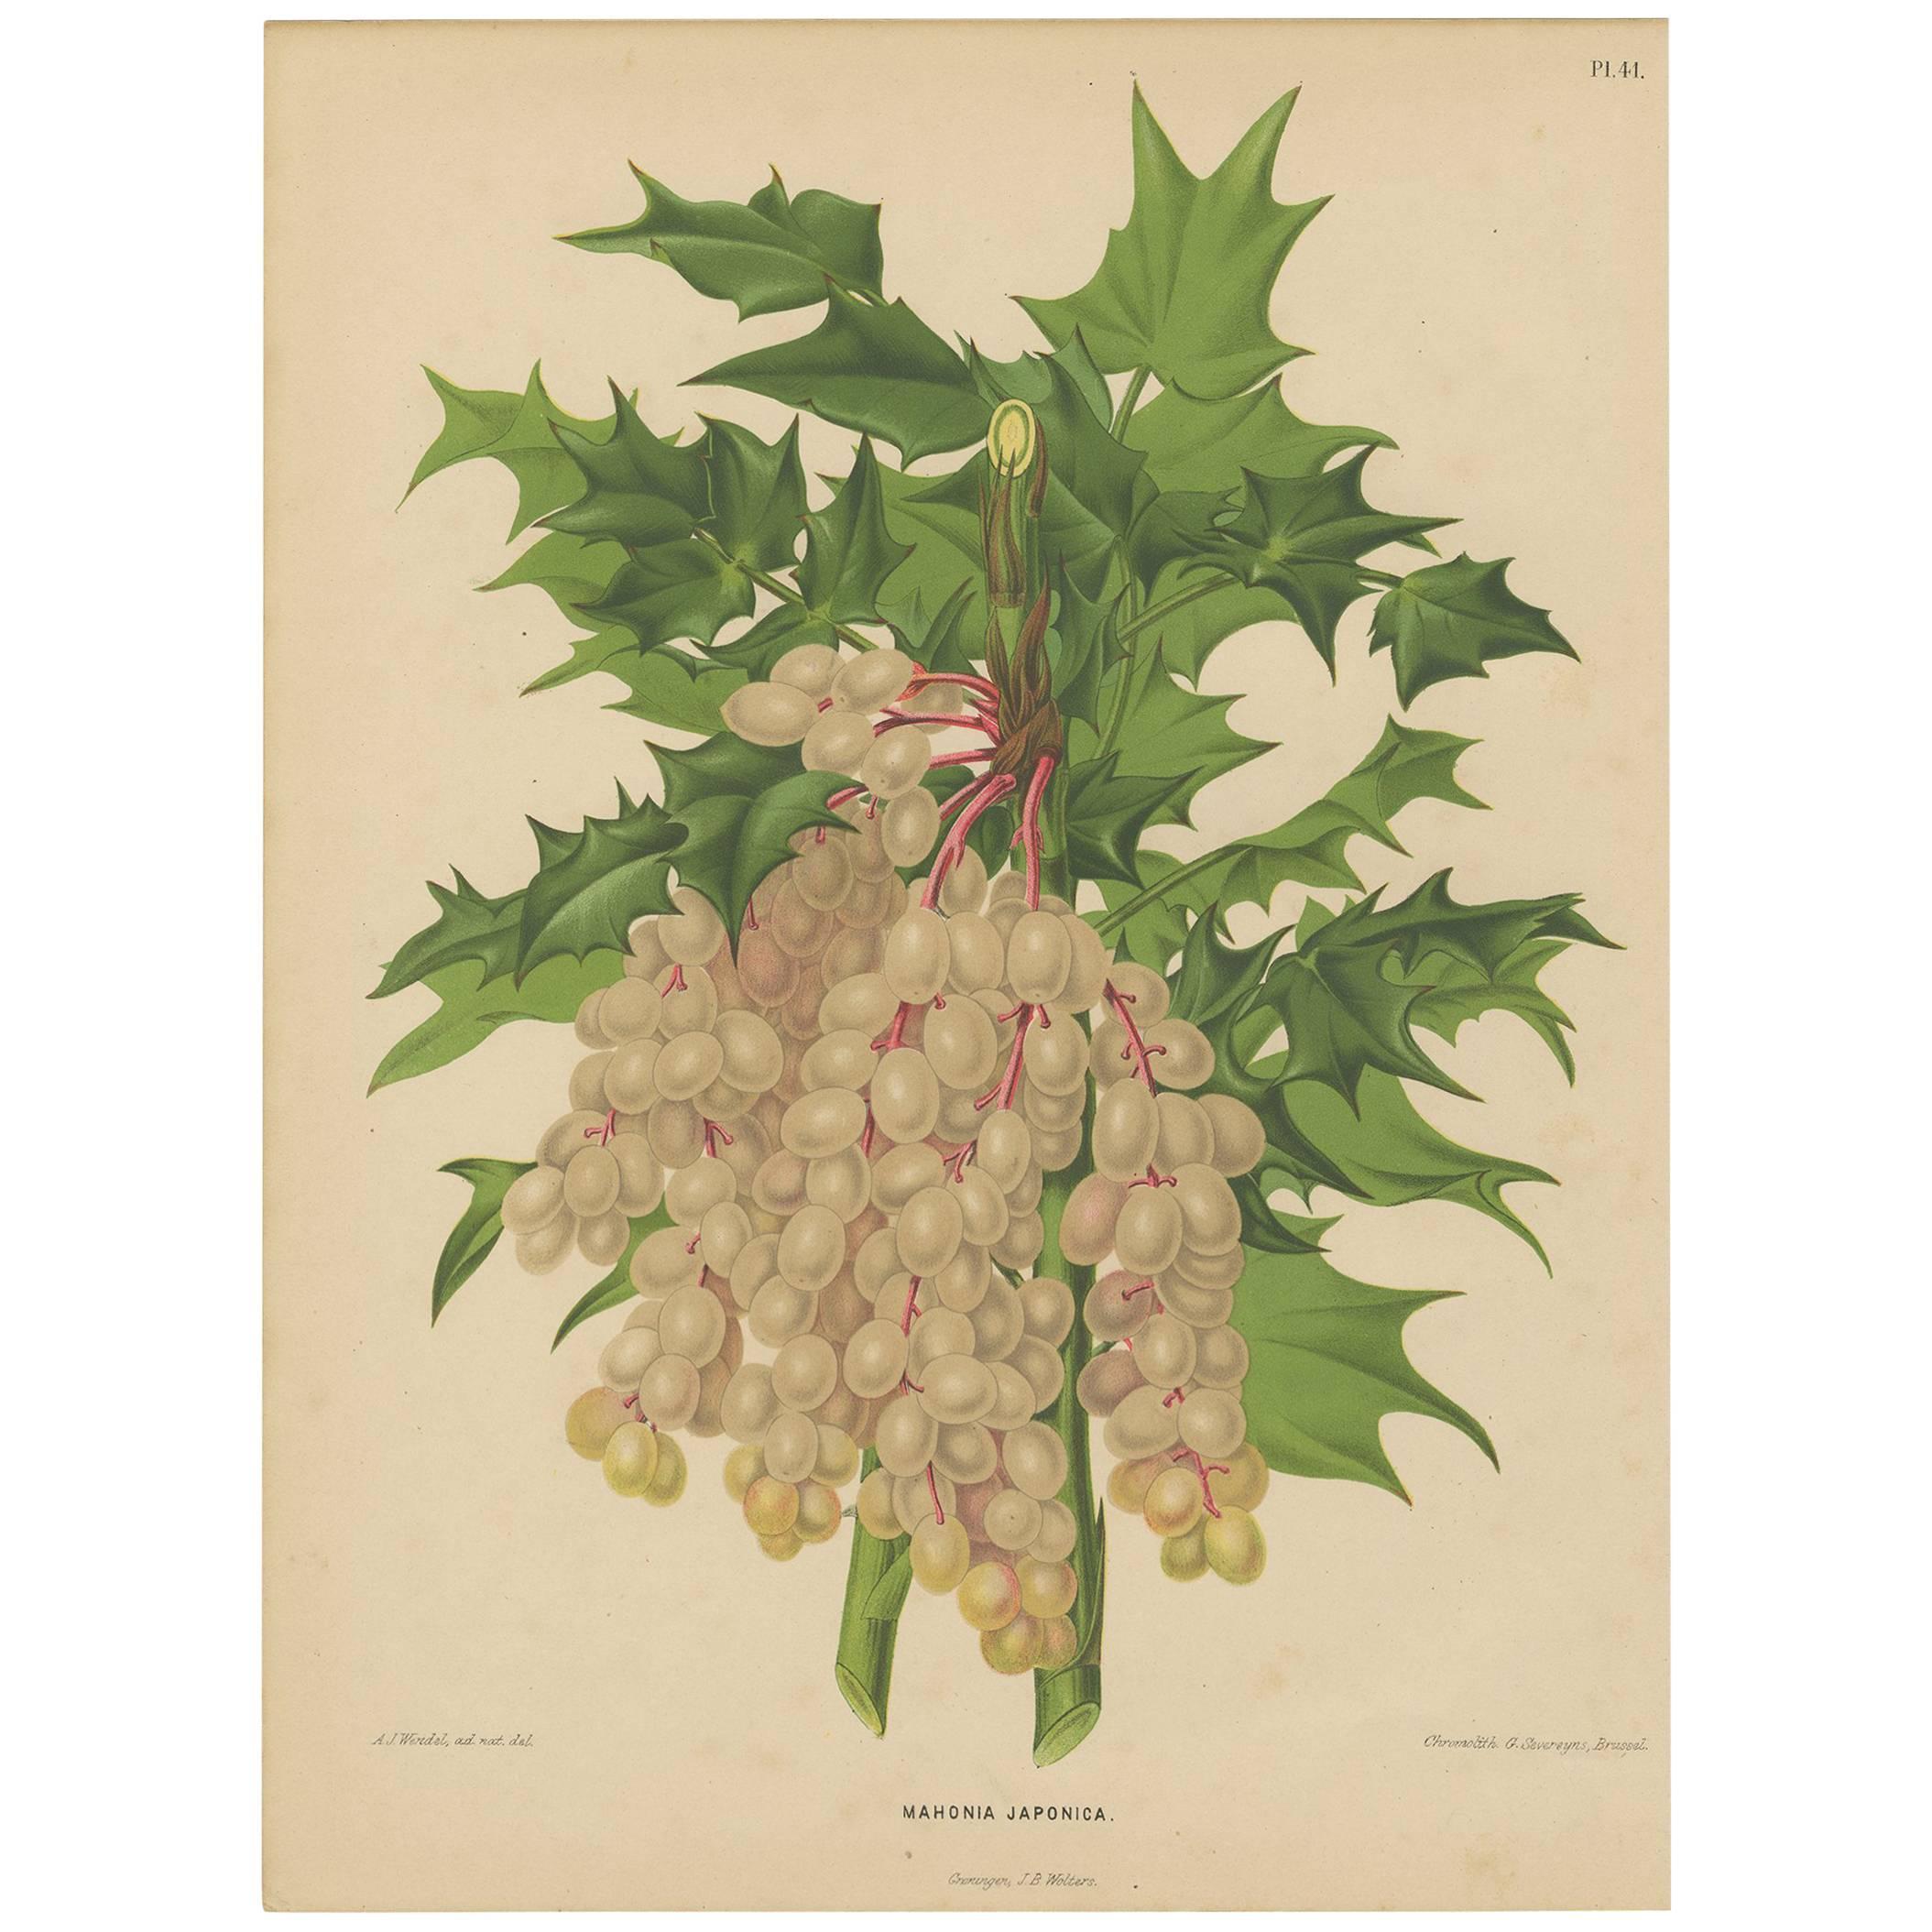 Antique Plant Print of the Mahonia Japonica by G. Severeyns, 1879